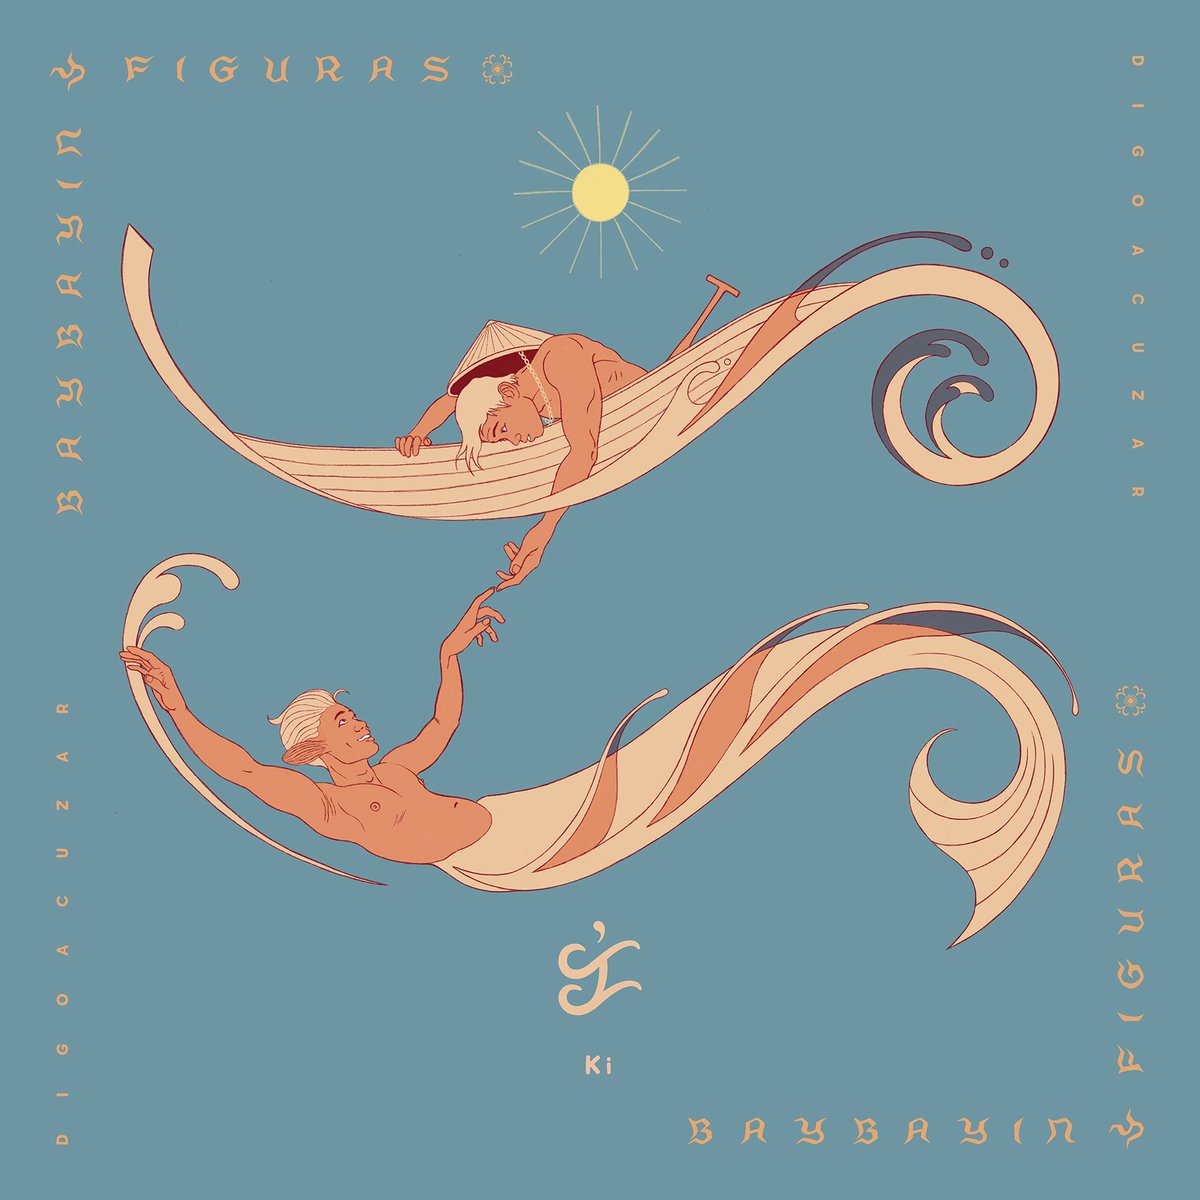 ᜃᜒ · 𝙠𝙞
 
In the world of 𝘬𝘪𝘭𝘪𝘨, a merman captivates a boatman's gaze, symbolizing a harmonious blend of land and sea. Like baybayin meets letras y figuras, a new art form emerges. 🧜‍♂️ 🩷
 
#DigoAcuzar #BaybayinyFiguras #baybayin